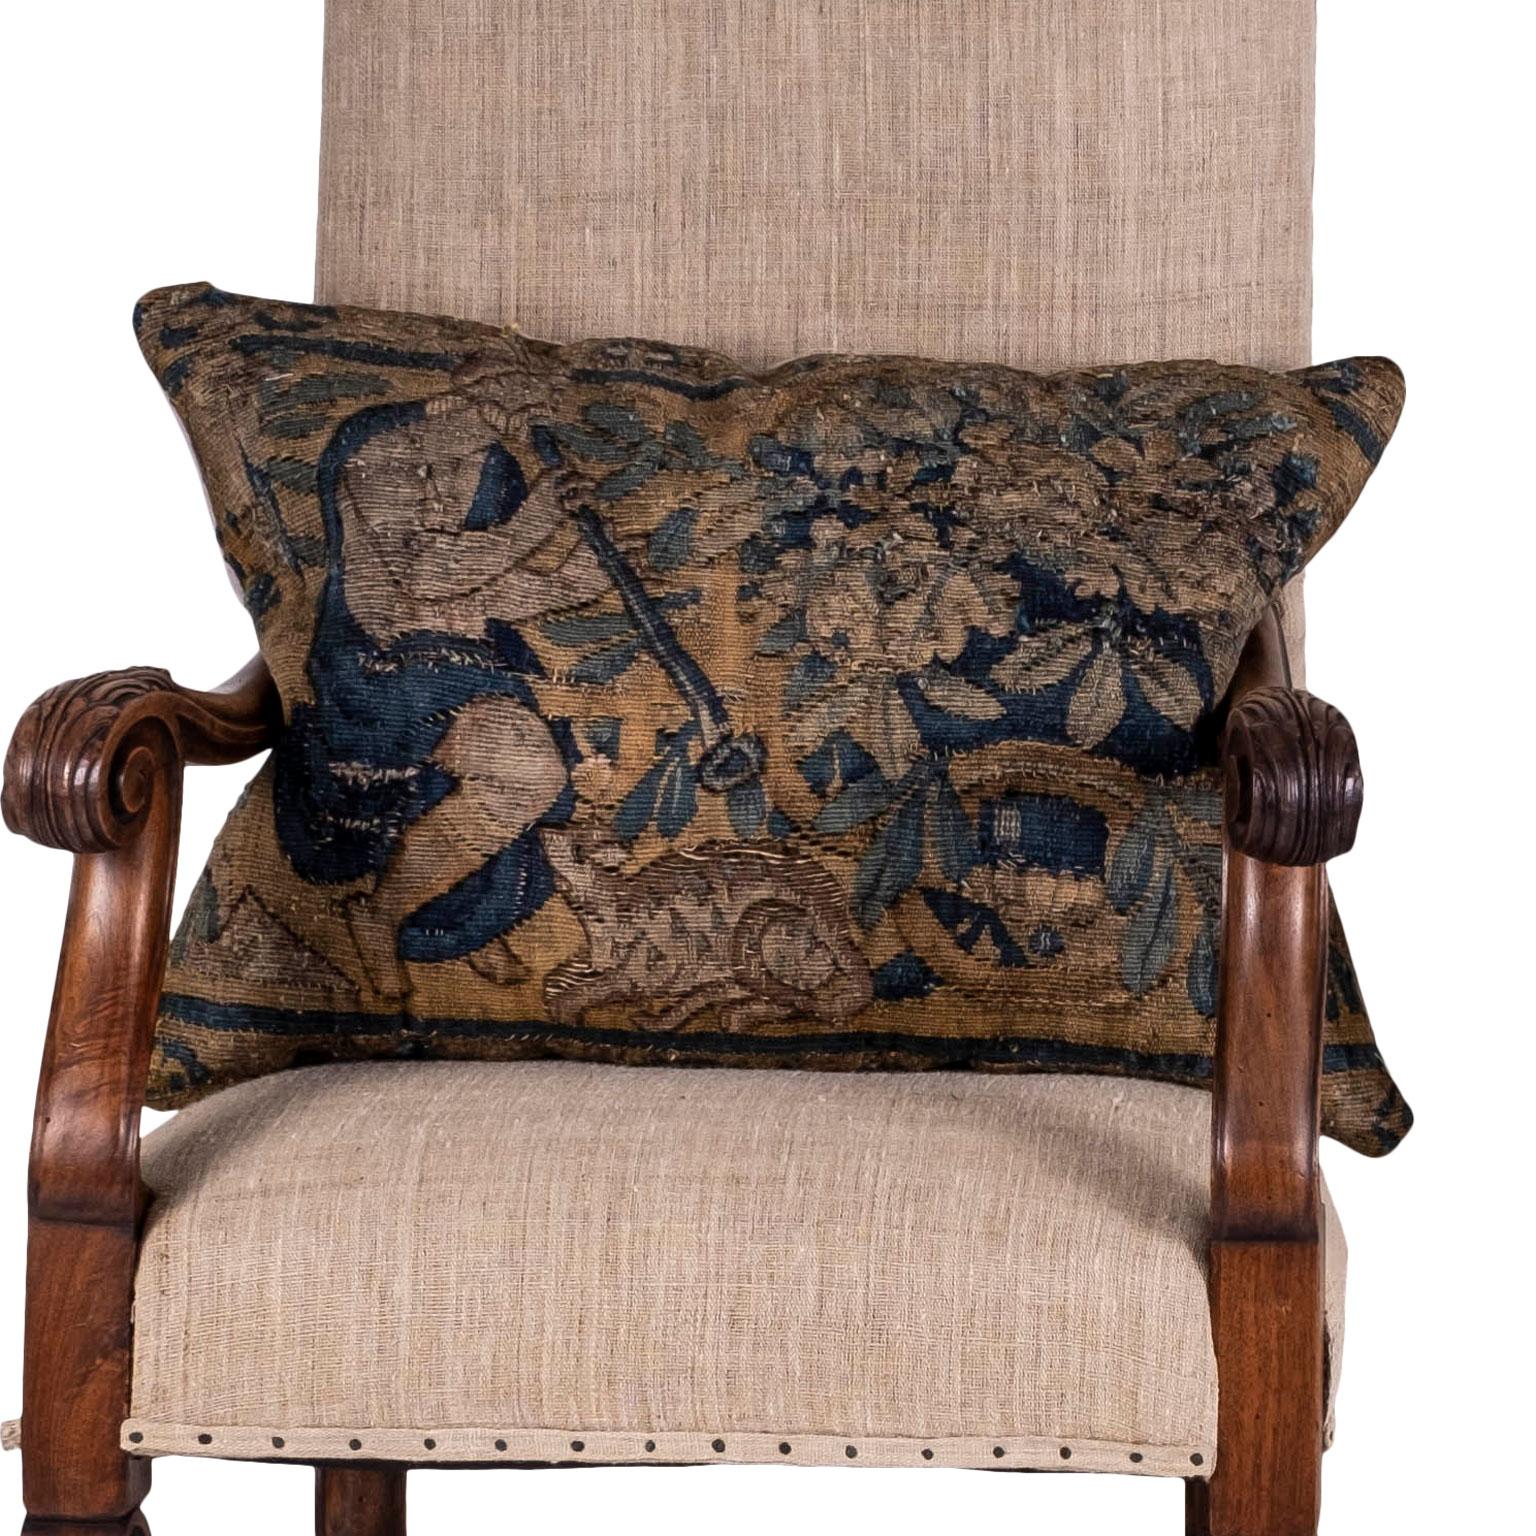 Hand-Woven Pair of Flemish Tapestry Cushions